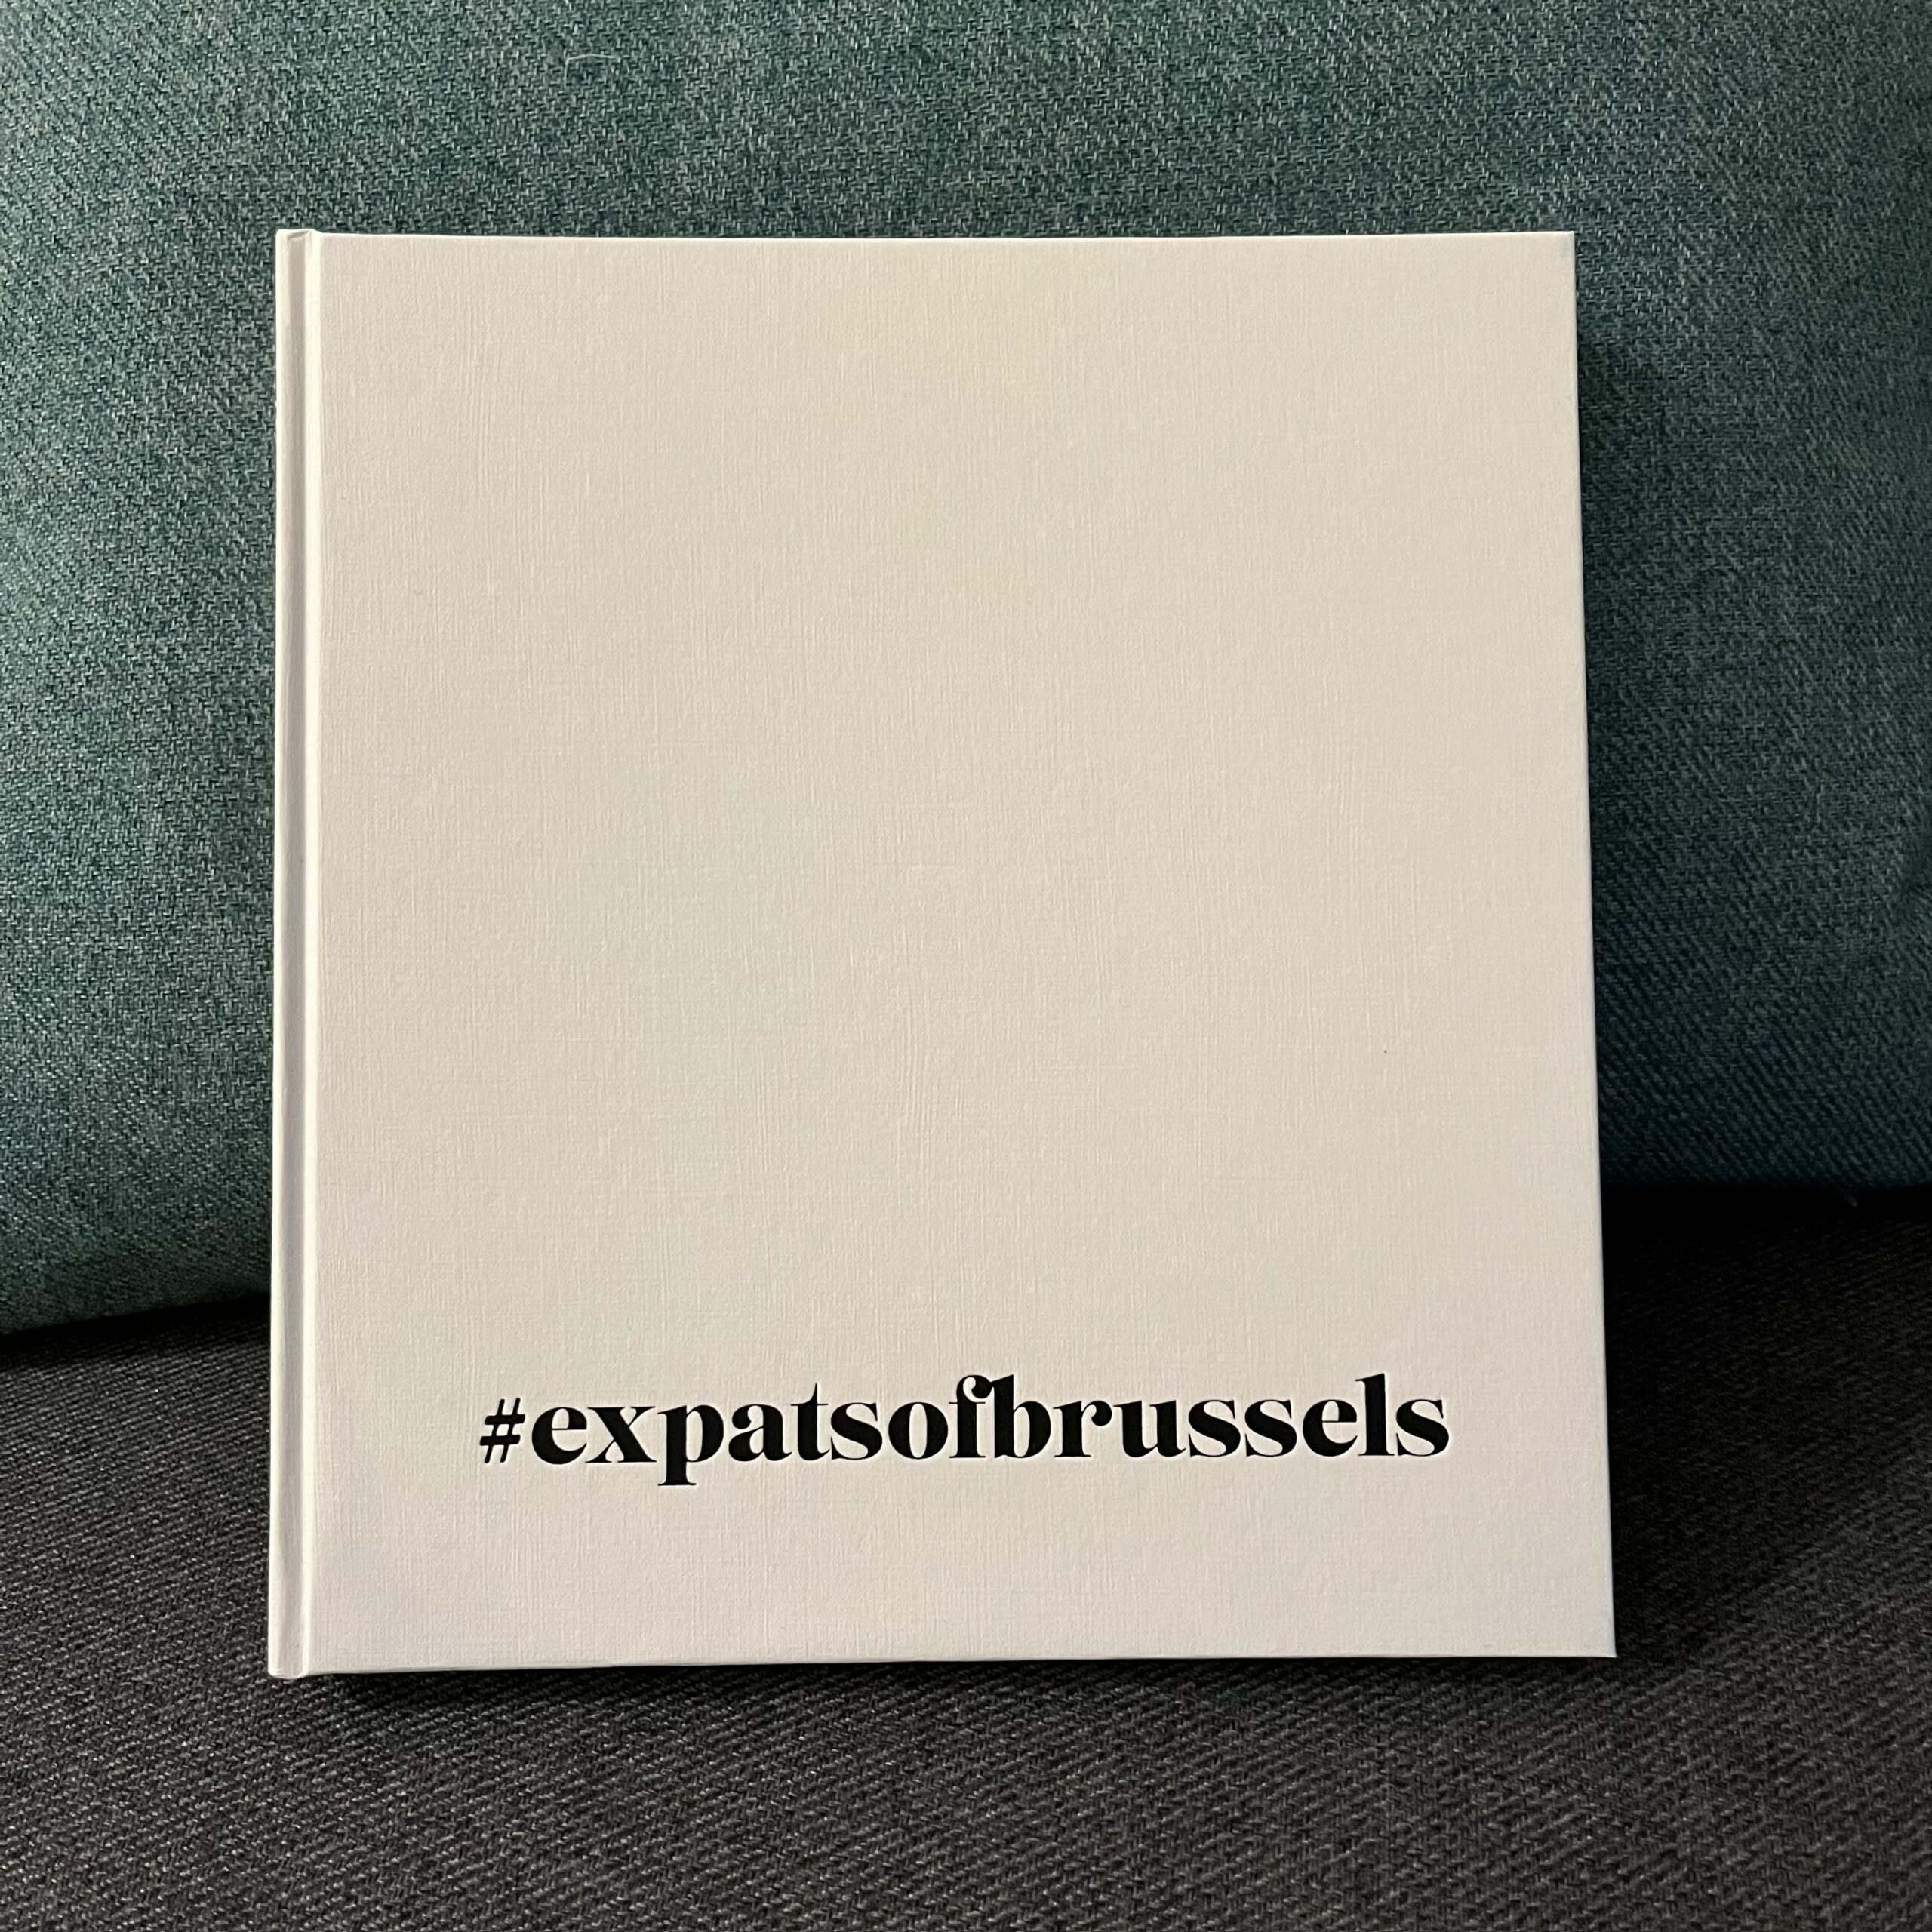 #expatsofbrussels